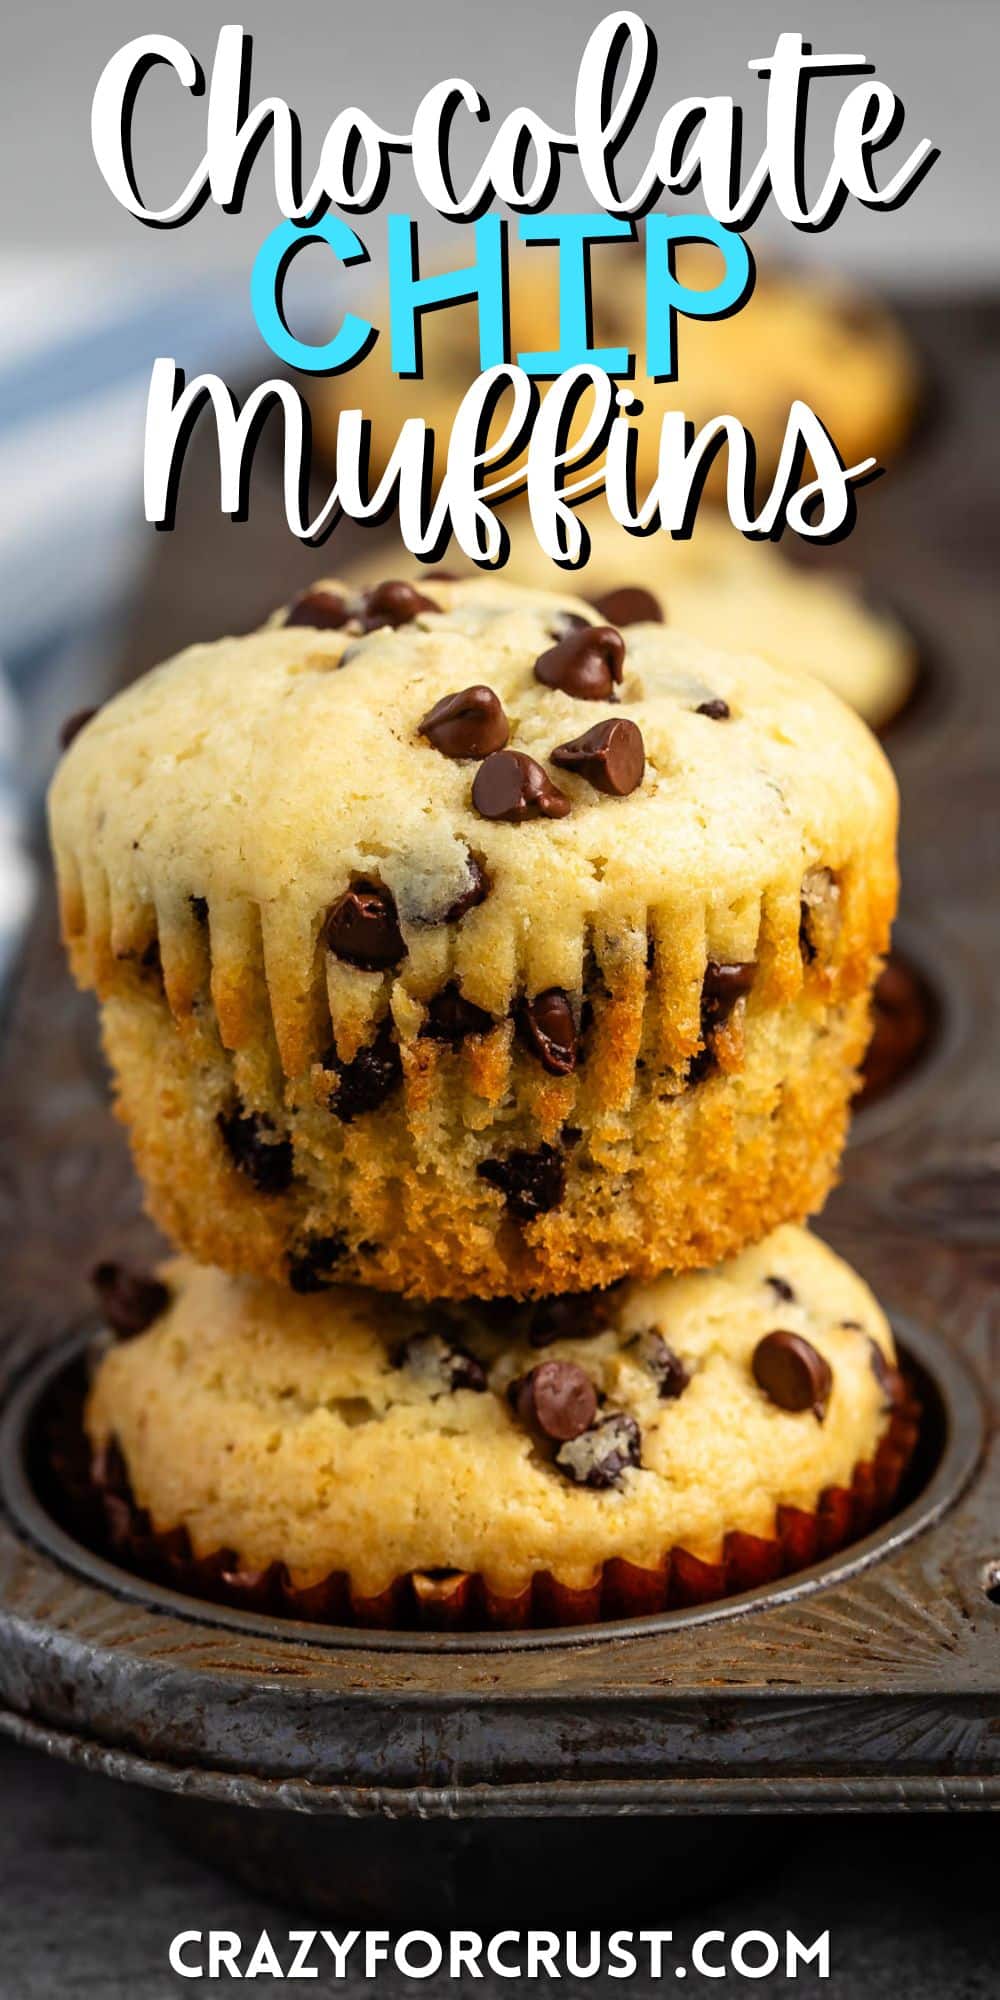 stacked muffins in the baking pan with mini chocolate chips baked in with words on the image.